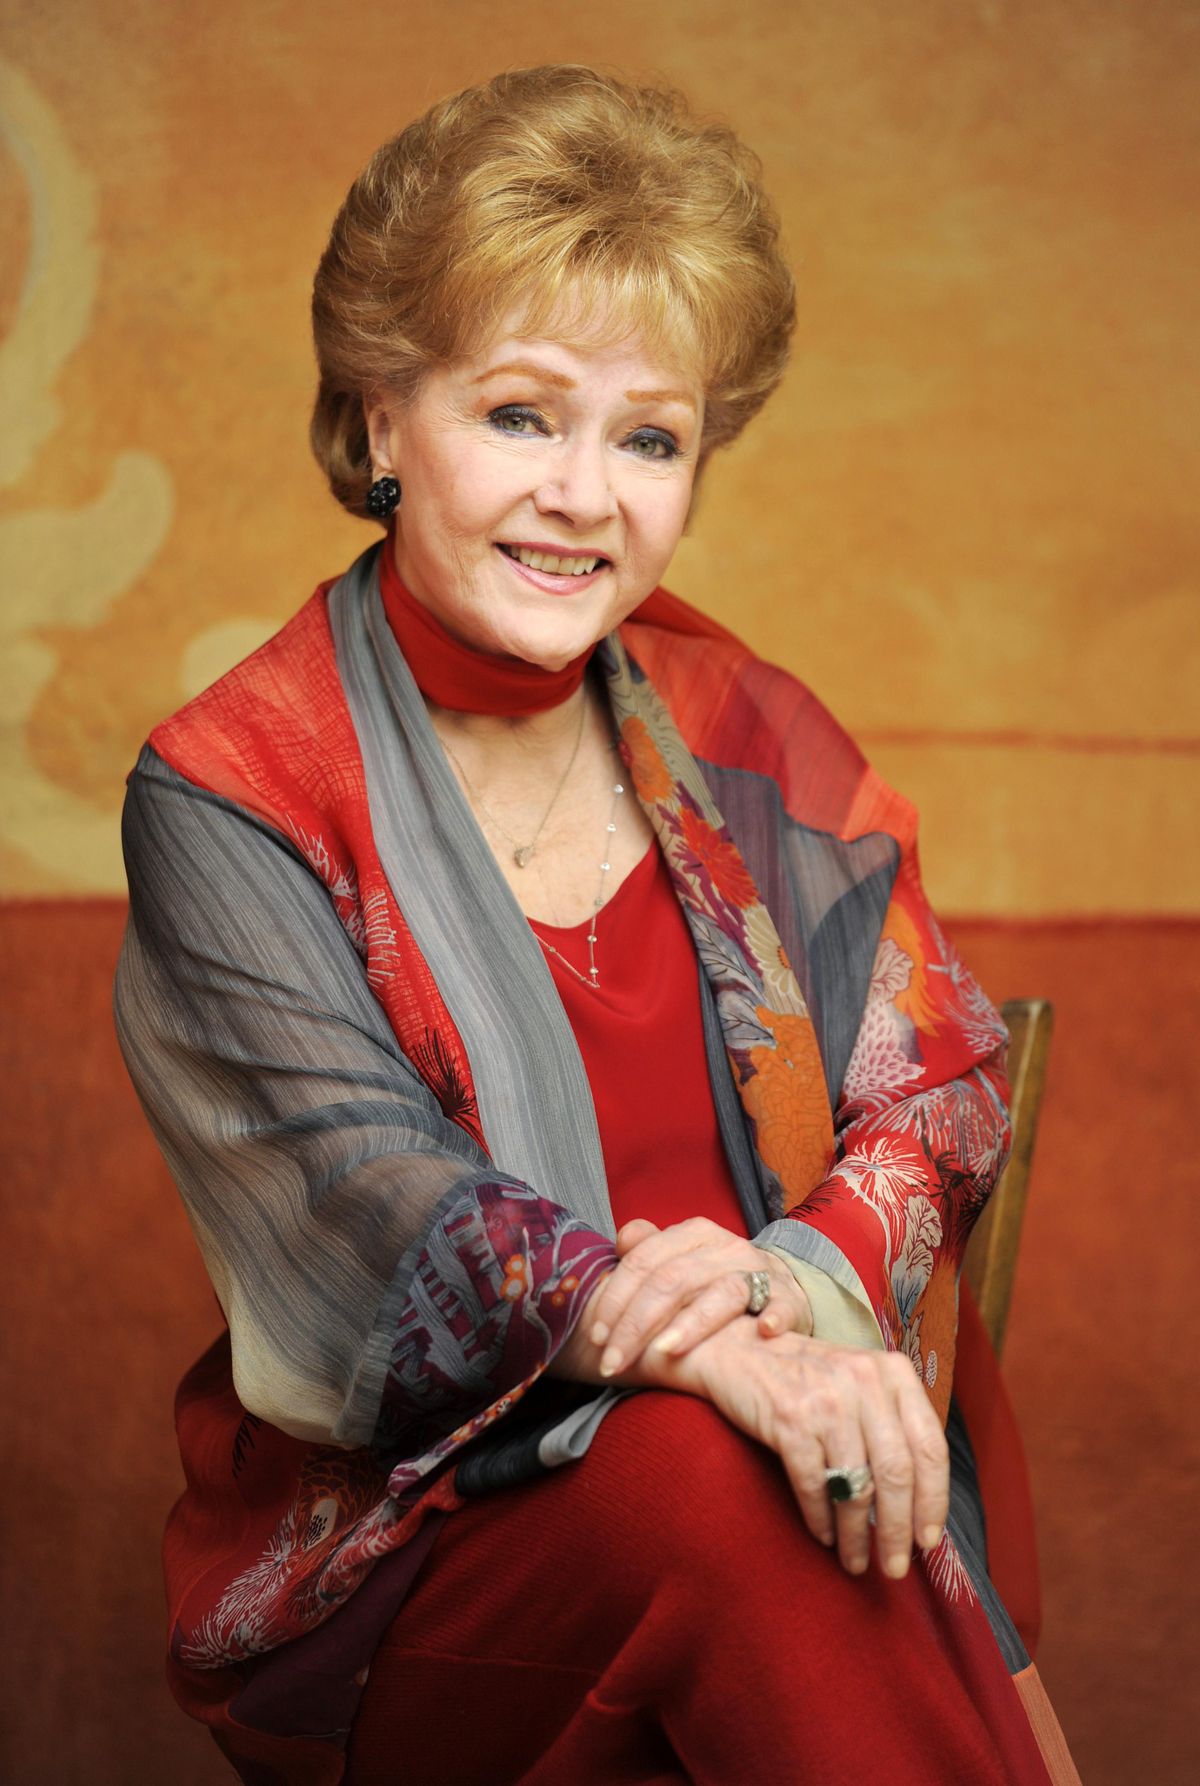 FILE - In this May 21, 2013 file photo, actress Debbie Reynolds poses for a portrait in Beverly Hills, Calif. Reynolds, star of the 1952 classic "Singin